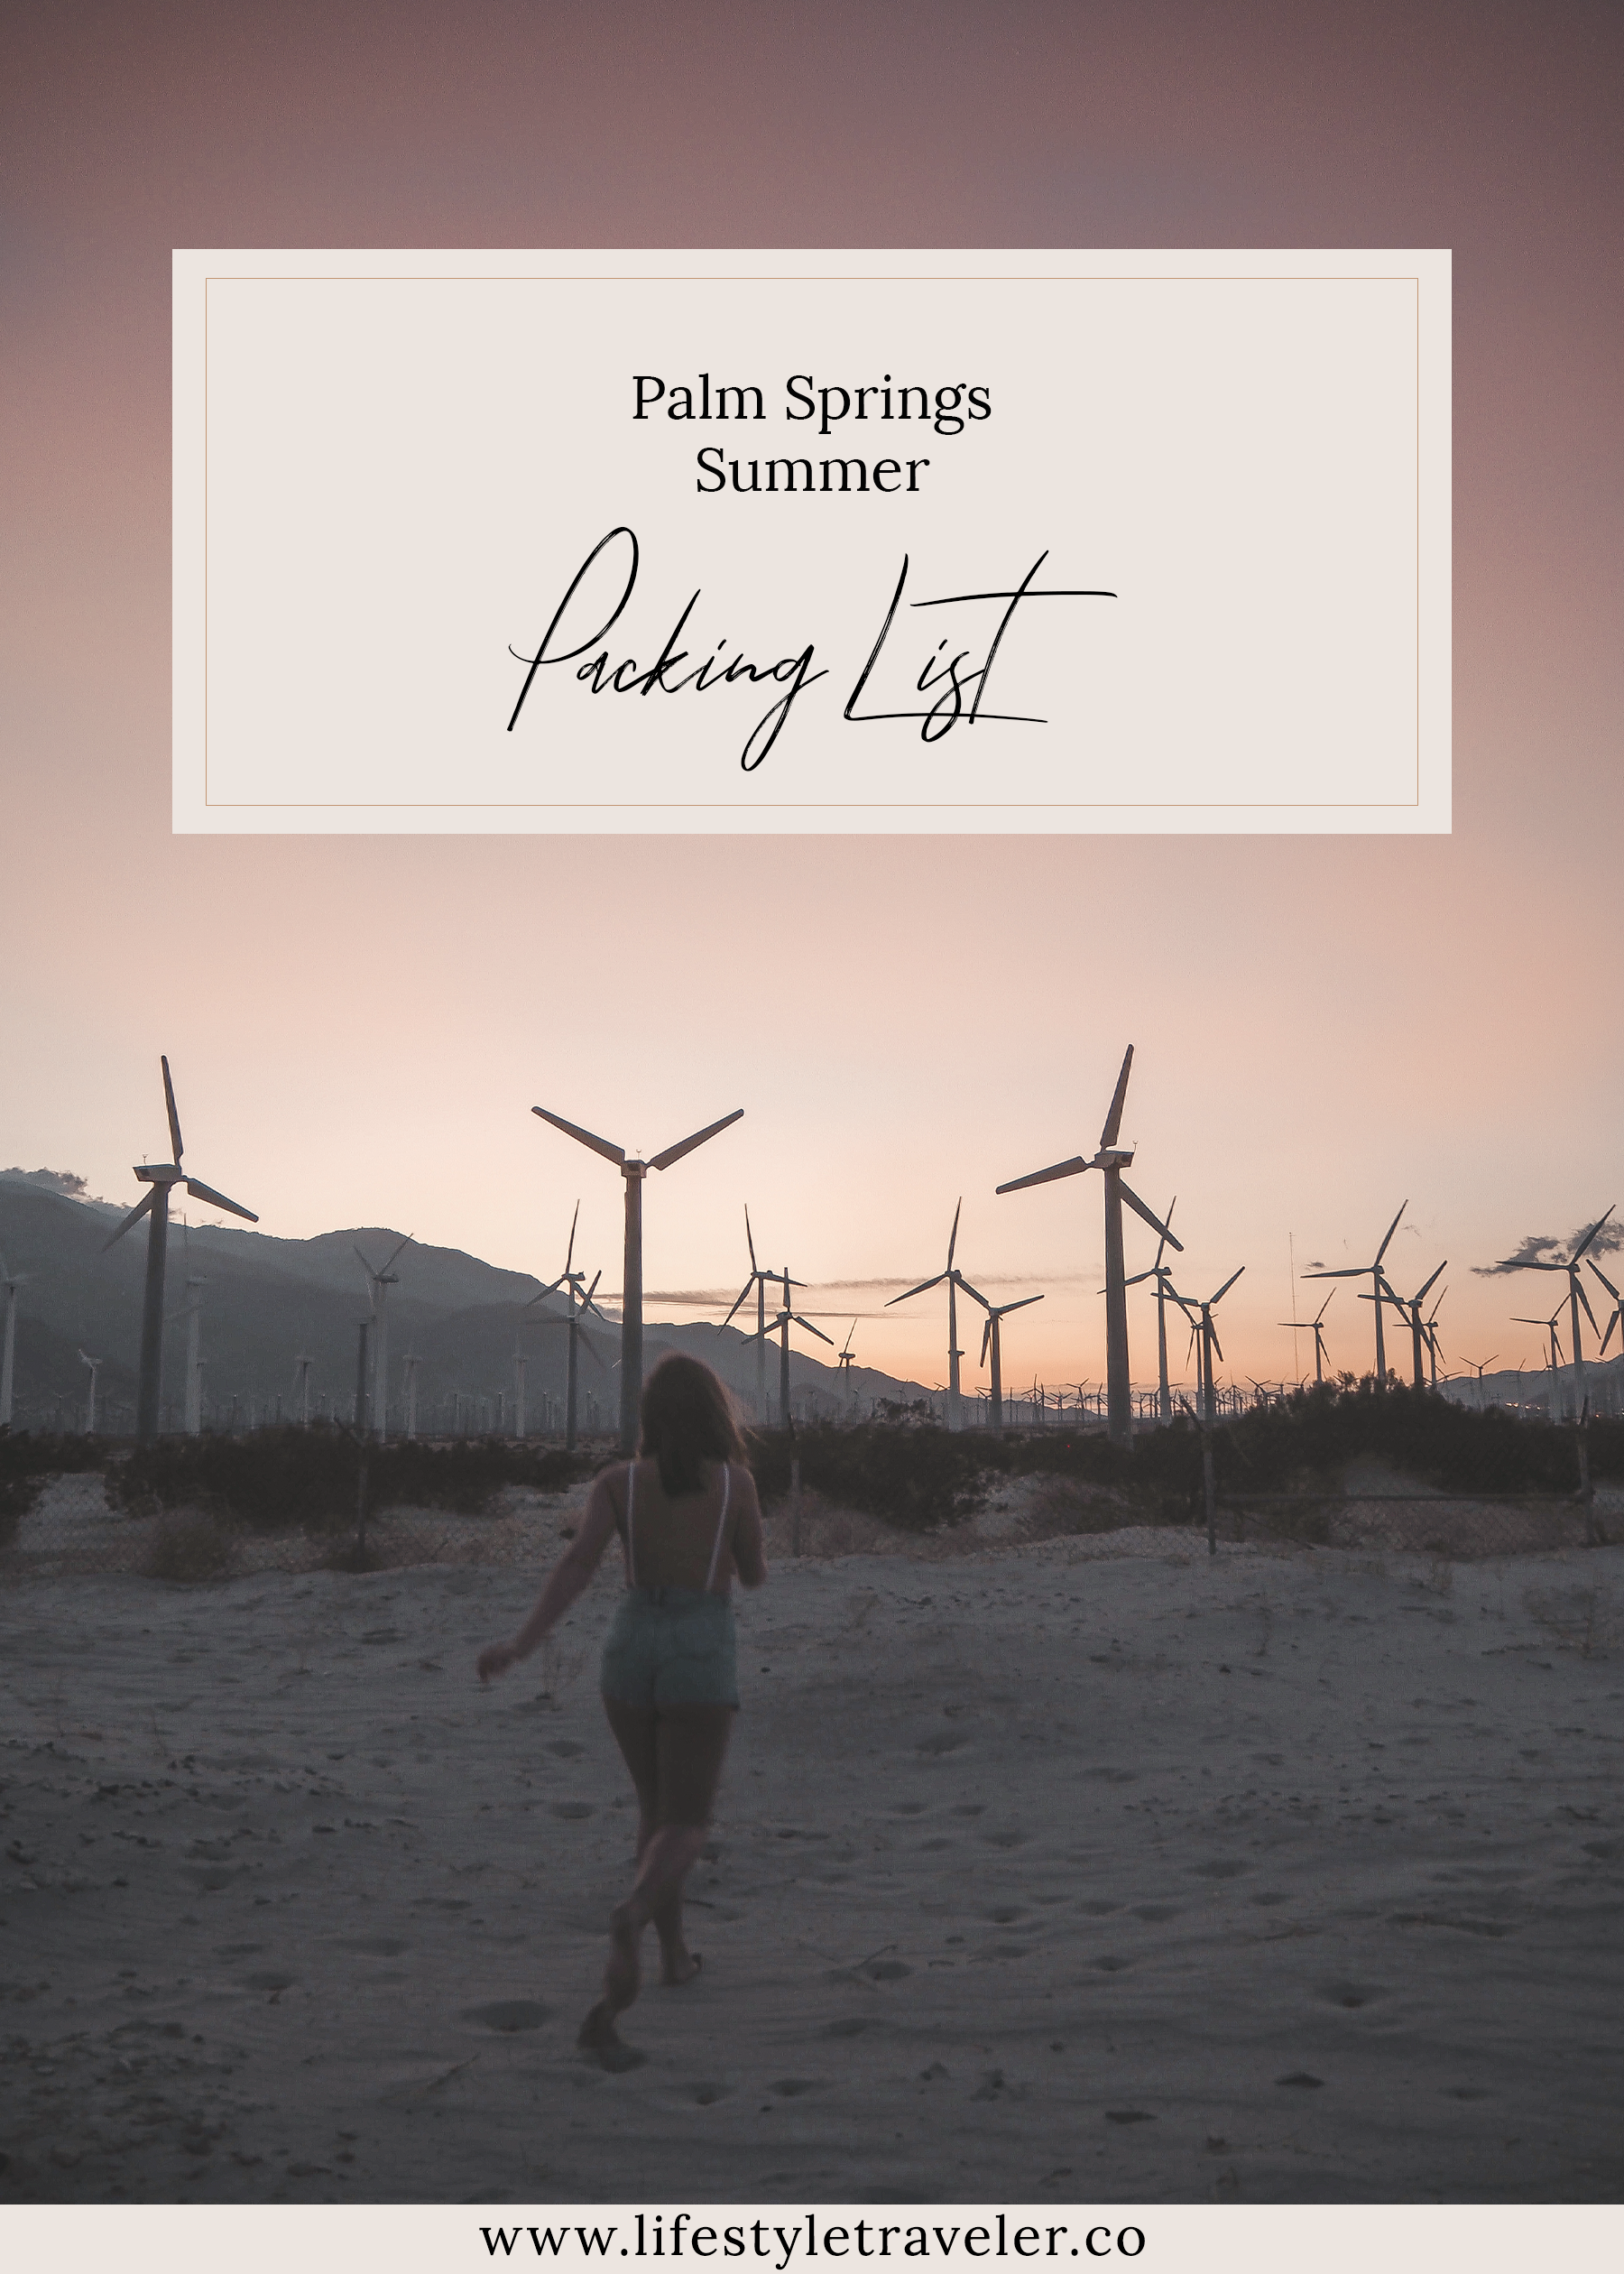 Palm Springs Summer Packing List | lifestyletraveler.co | IG: @lifestyletraveler.co